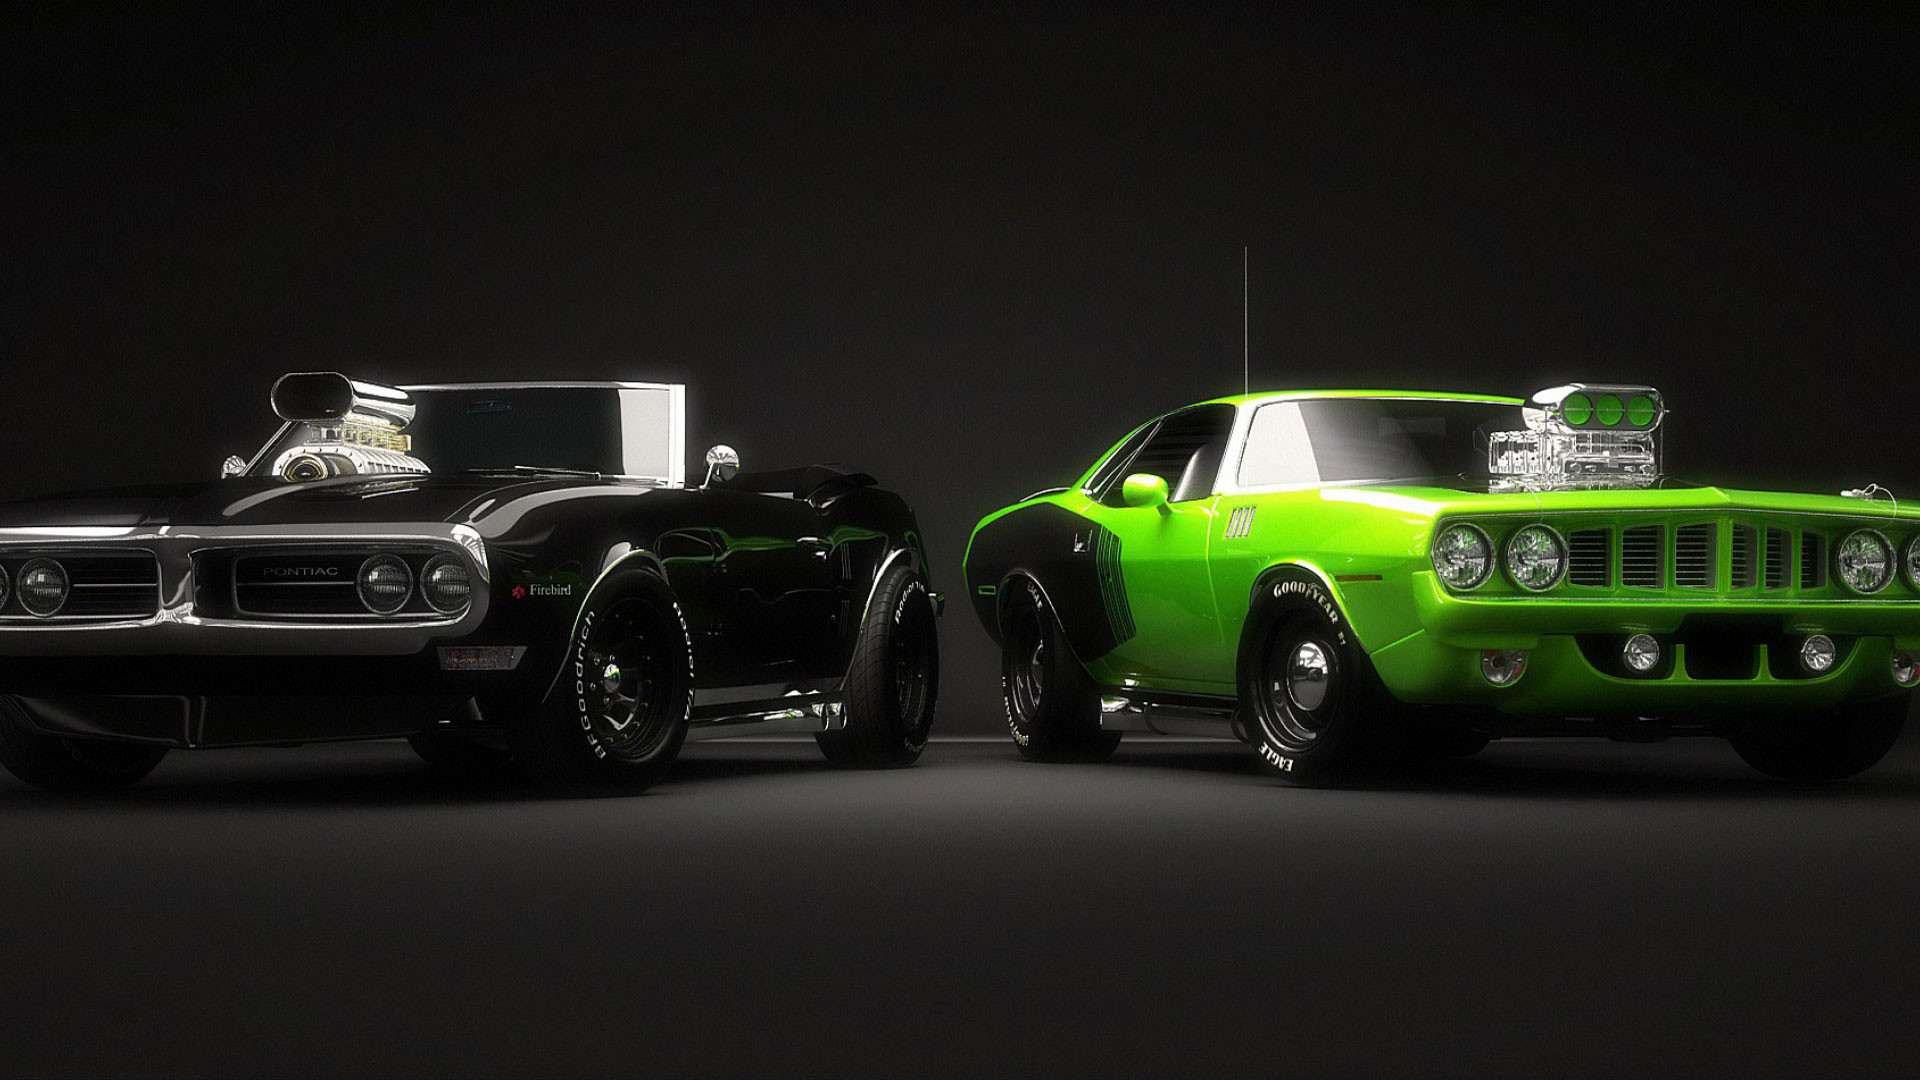 1920x1080 hd pics photos stunning old cars green and black attractive hd quality desktop  background wallpaper